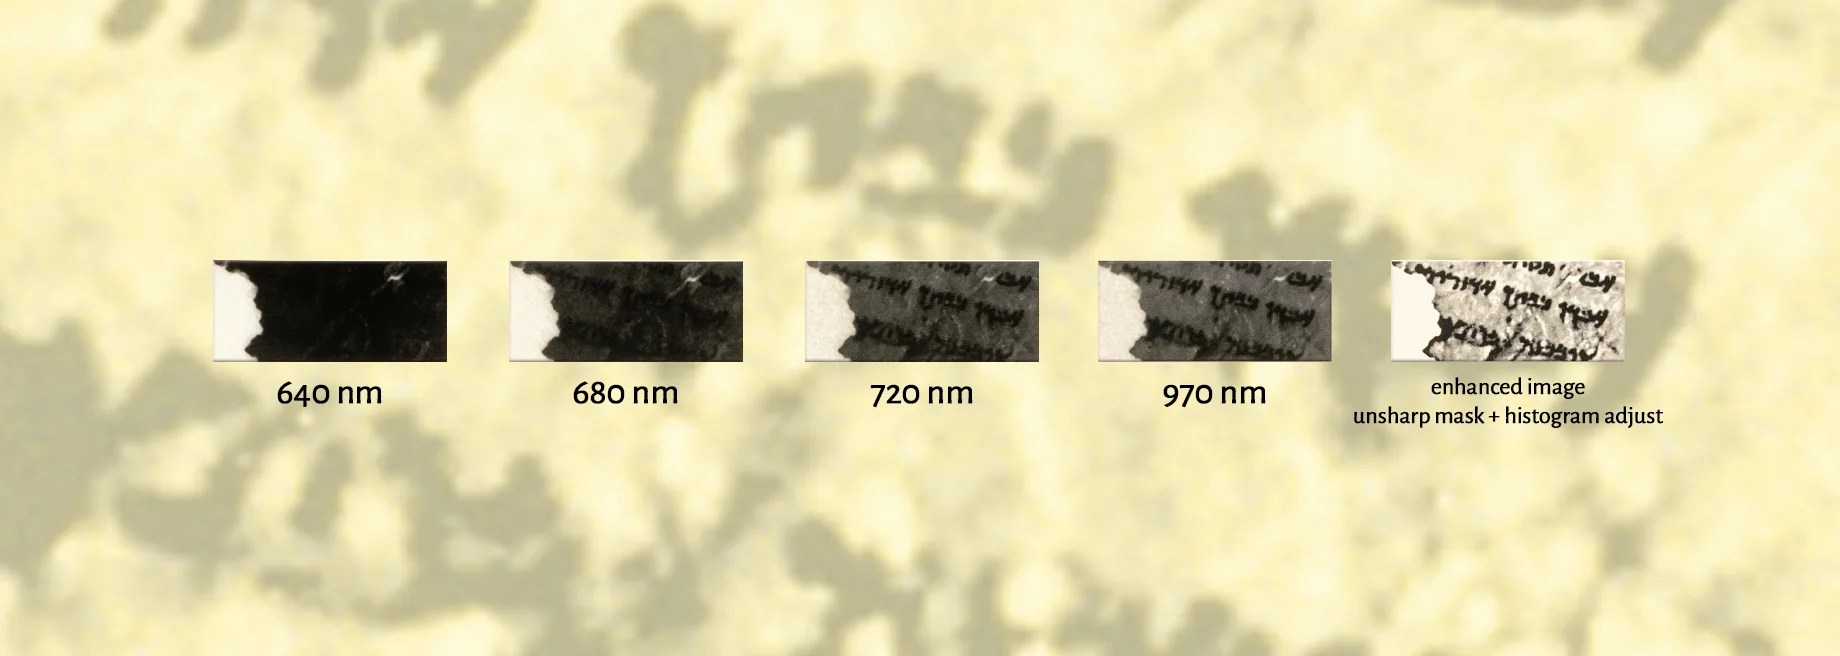 A series of images of the same section of the Dead Sea Scrolls, with the text in each image becoming progressively clearer as it is enhanced.